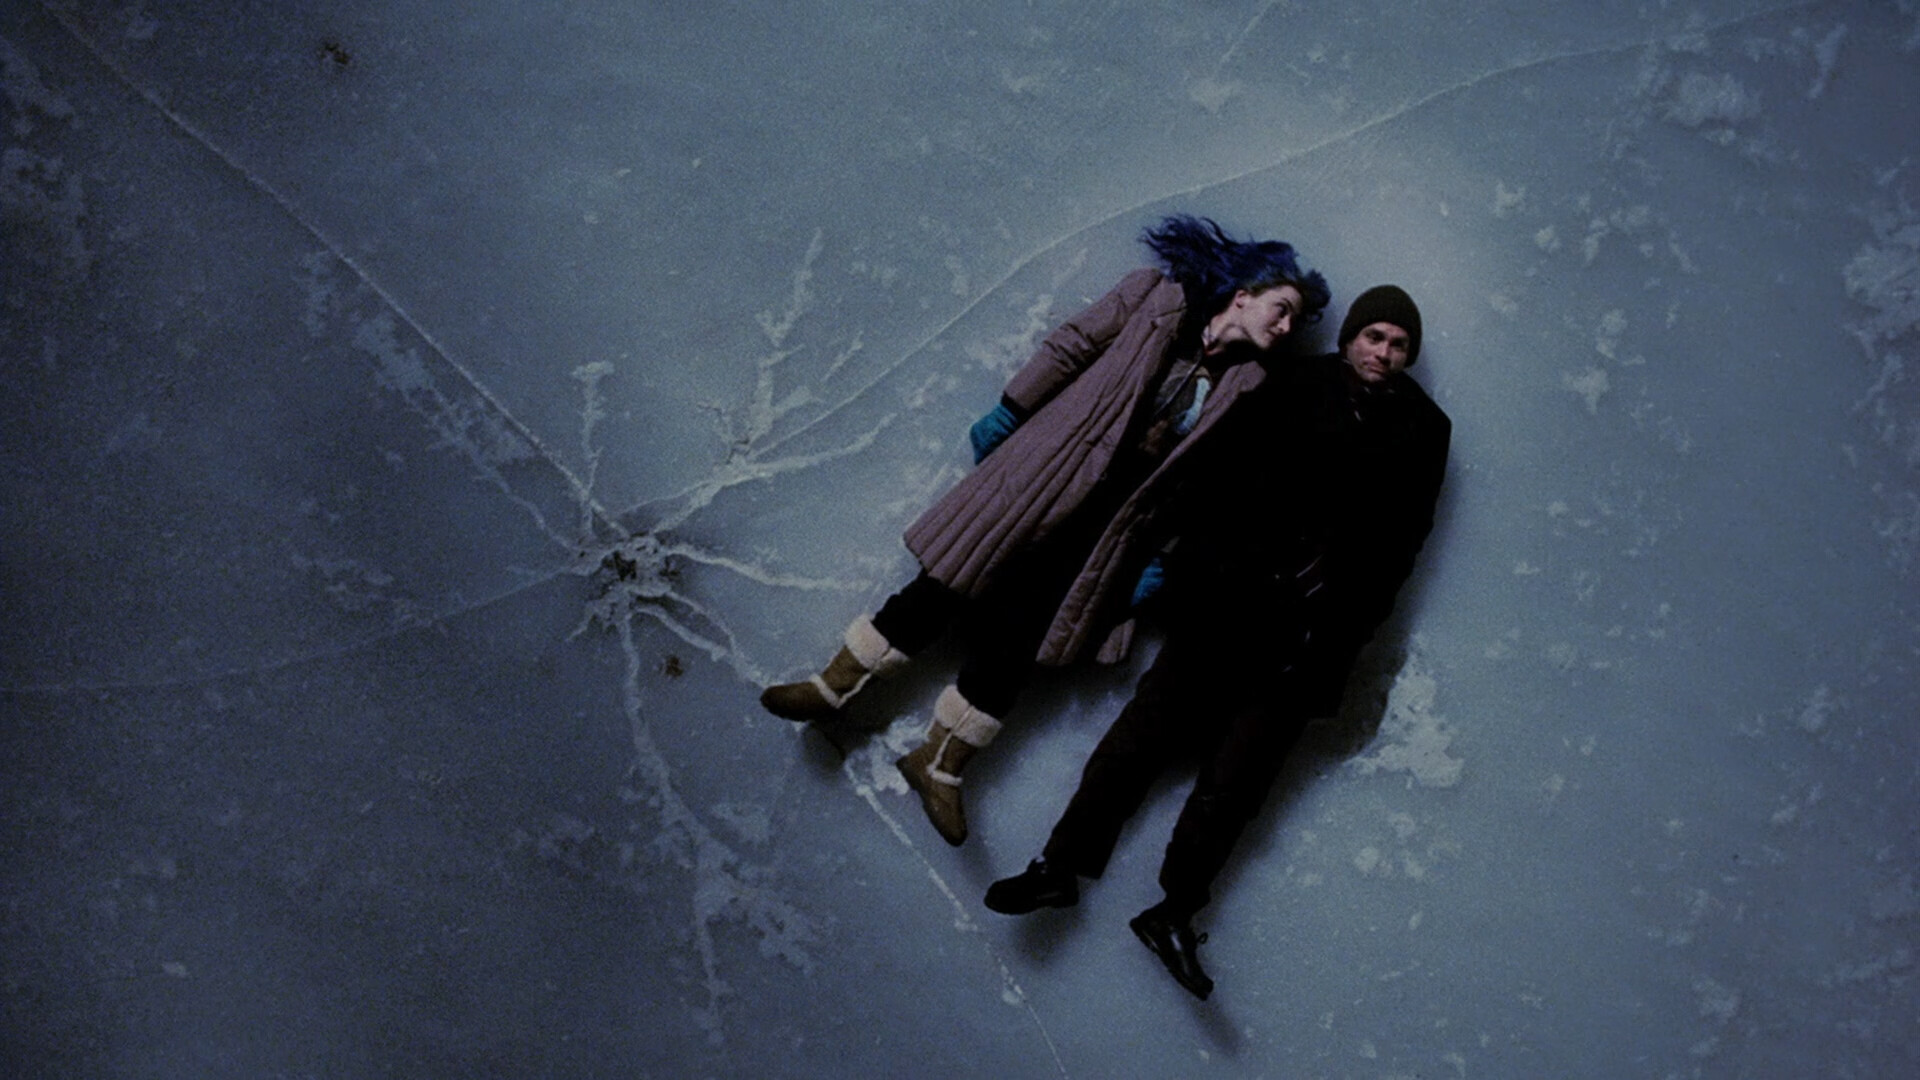 Eternal Sunshine of the Spotless Mind: The film features an ensemble supporting cast that includes Kirsten Dunst, Mark Ruffalo, Elijah Wood, and Tom Wilkinson. 1920x1080 Full HD Wallpaper.